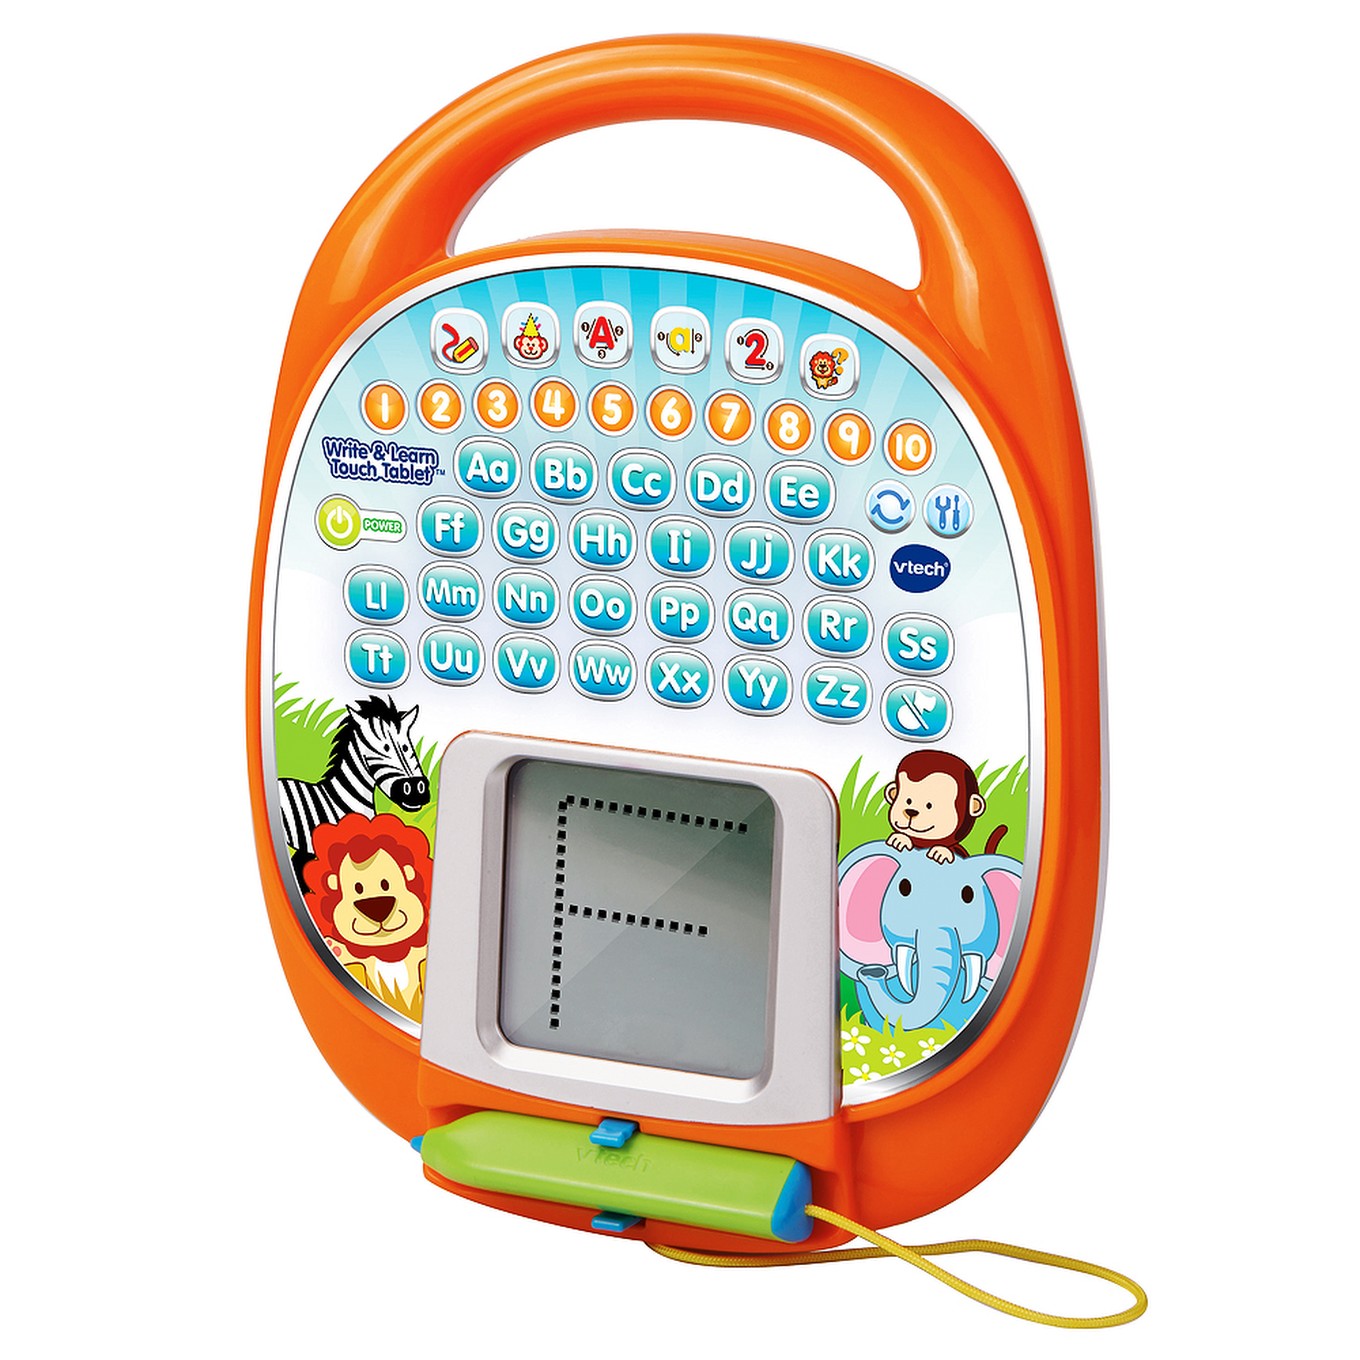 Vtech Tote and Go Laptop Preschool-K Learning System Education Games.  Works!!!